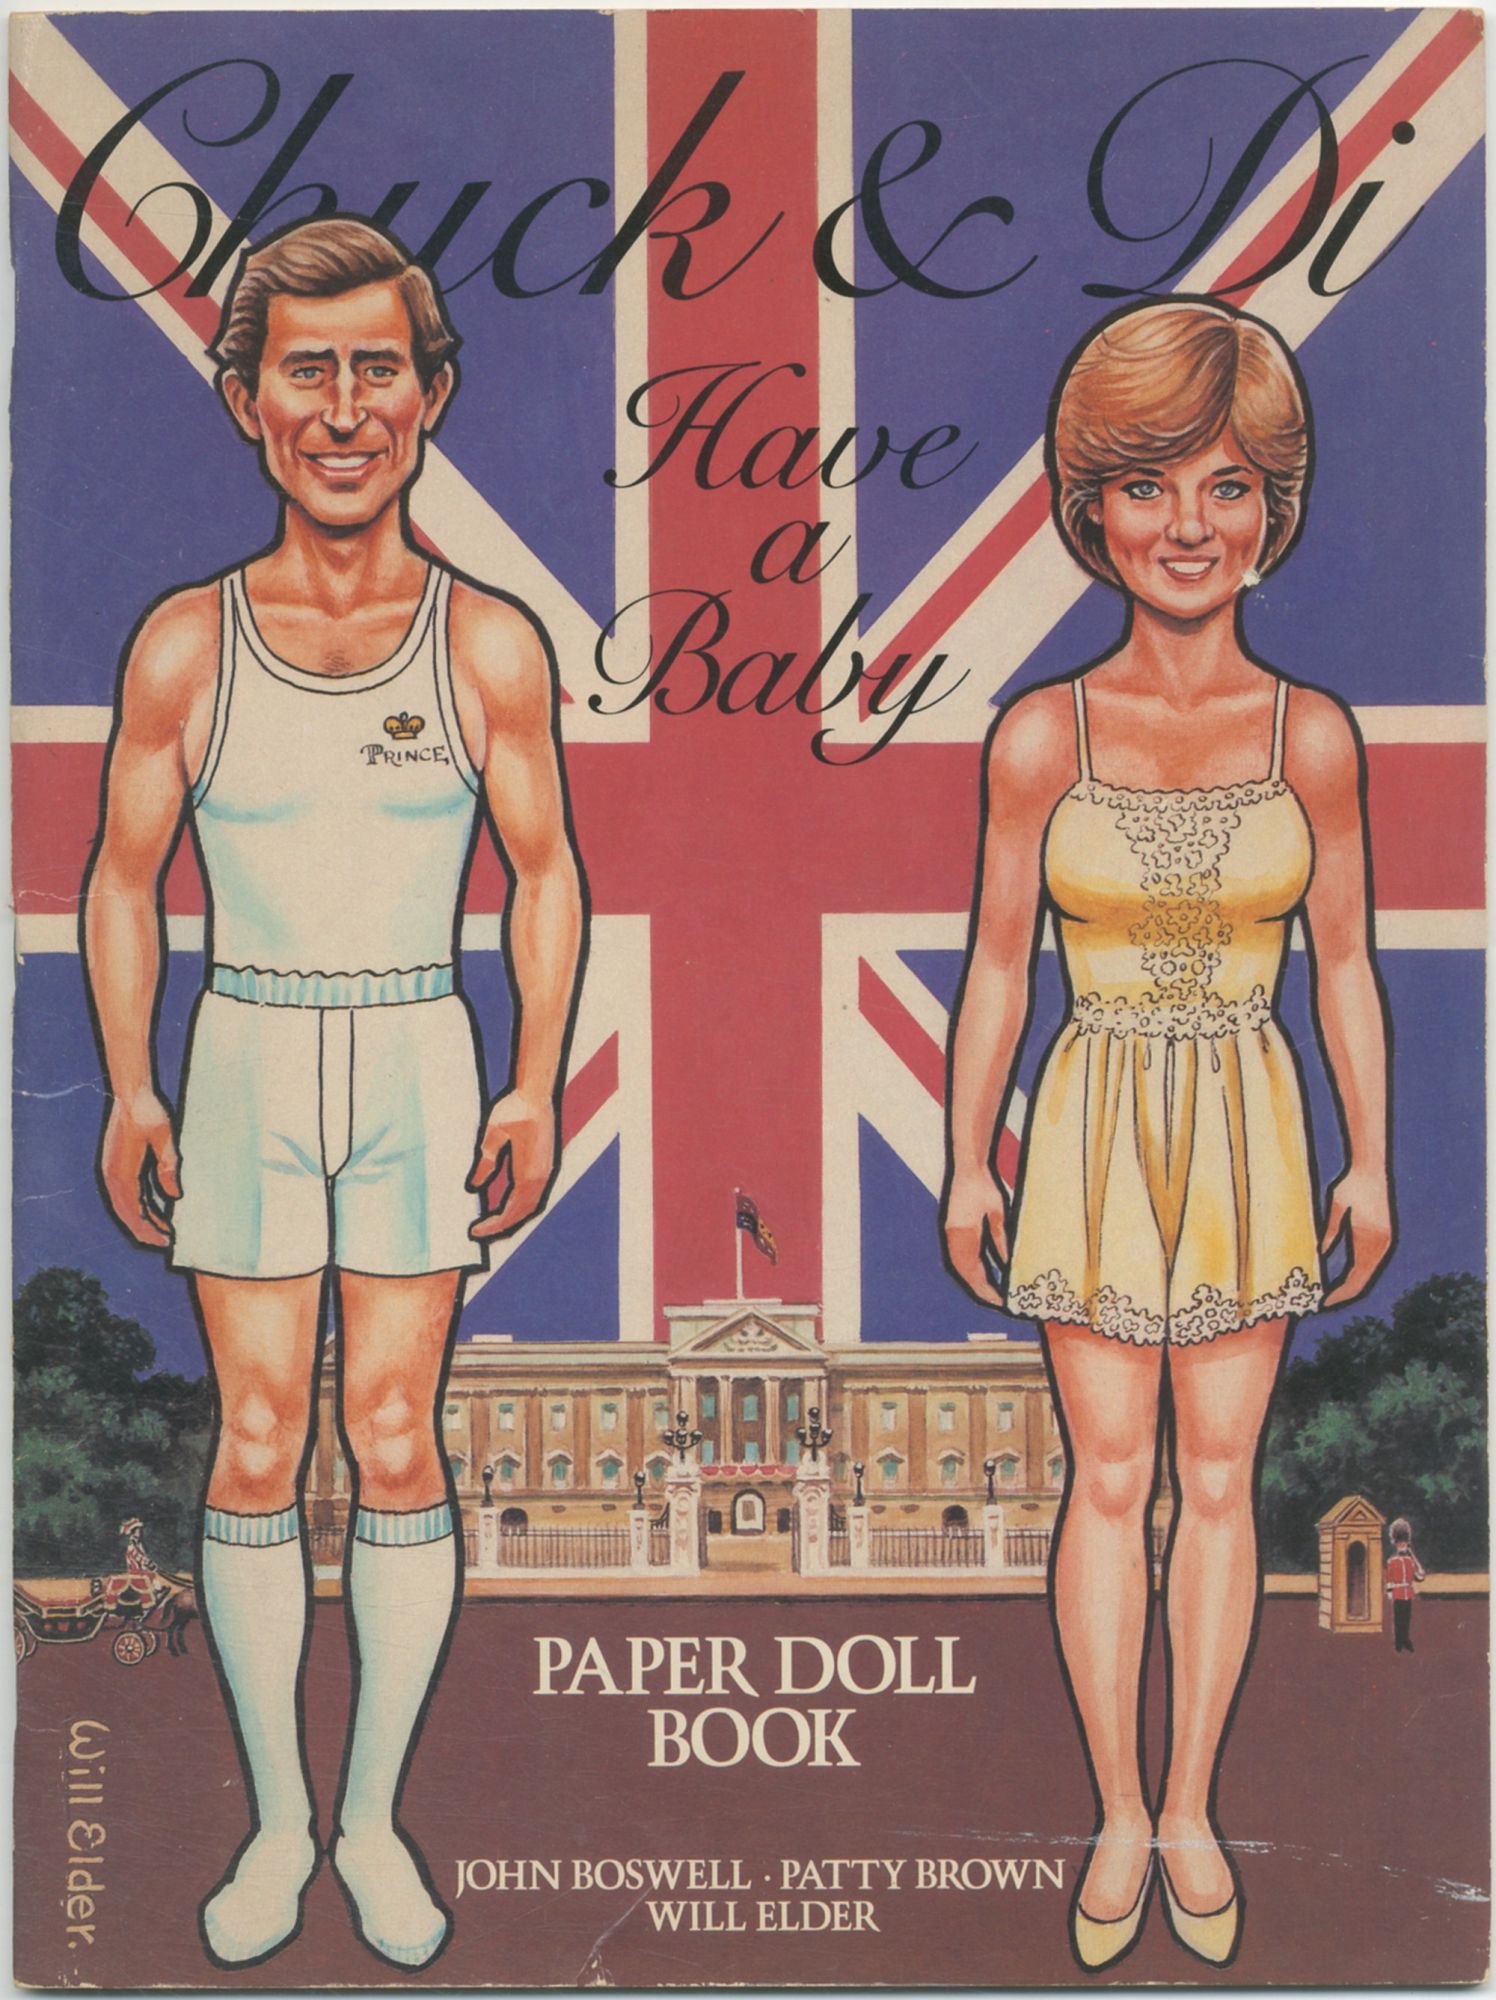 Chuck & Di Have a Baby: Paper Doll Book - BOSWELL, John, Patty Brown, and Will Elder